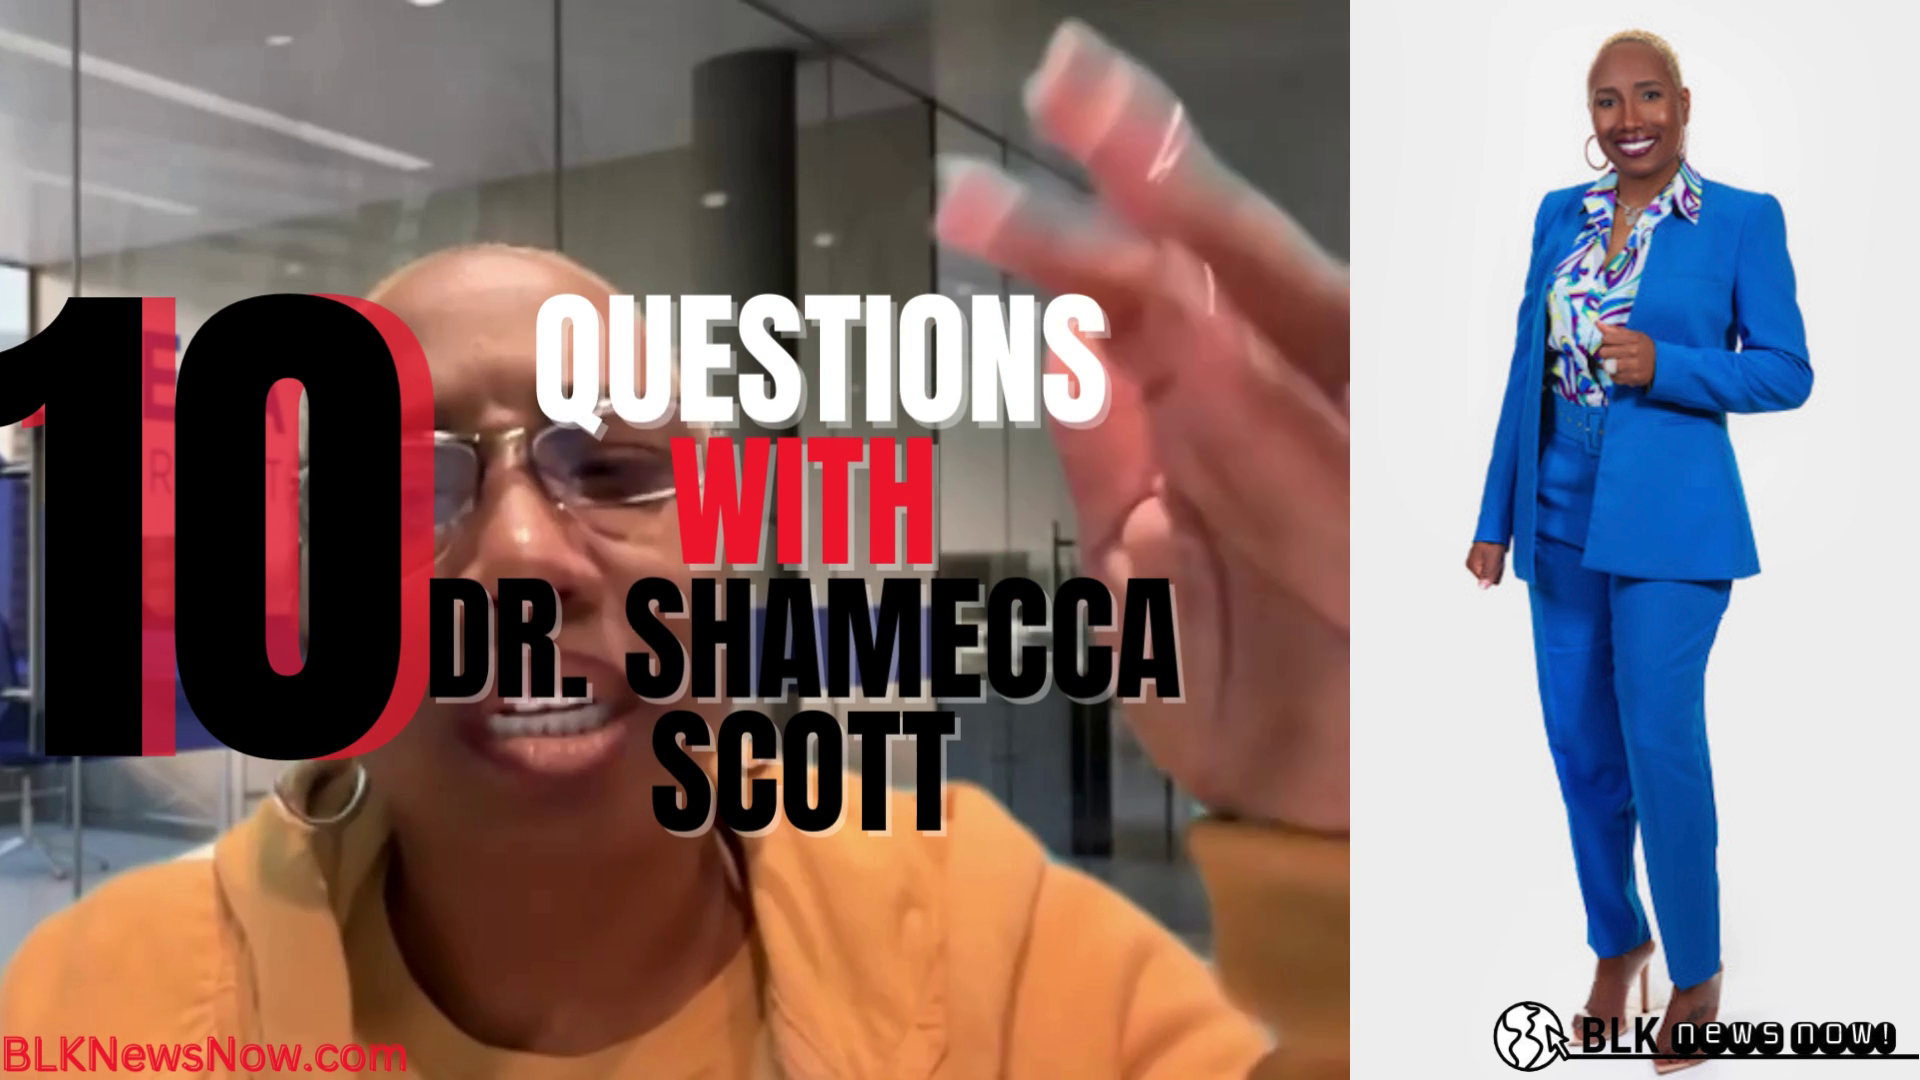 Psychologist Dr. Shamecca Scott shares advice on coping with racial trauma and discrimination, discusses new book